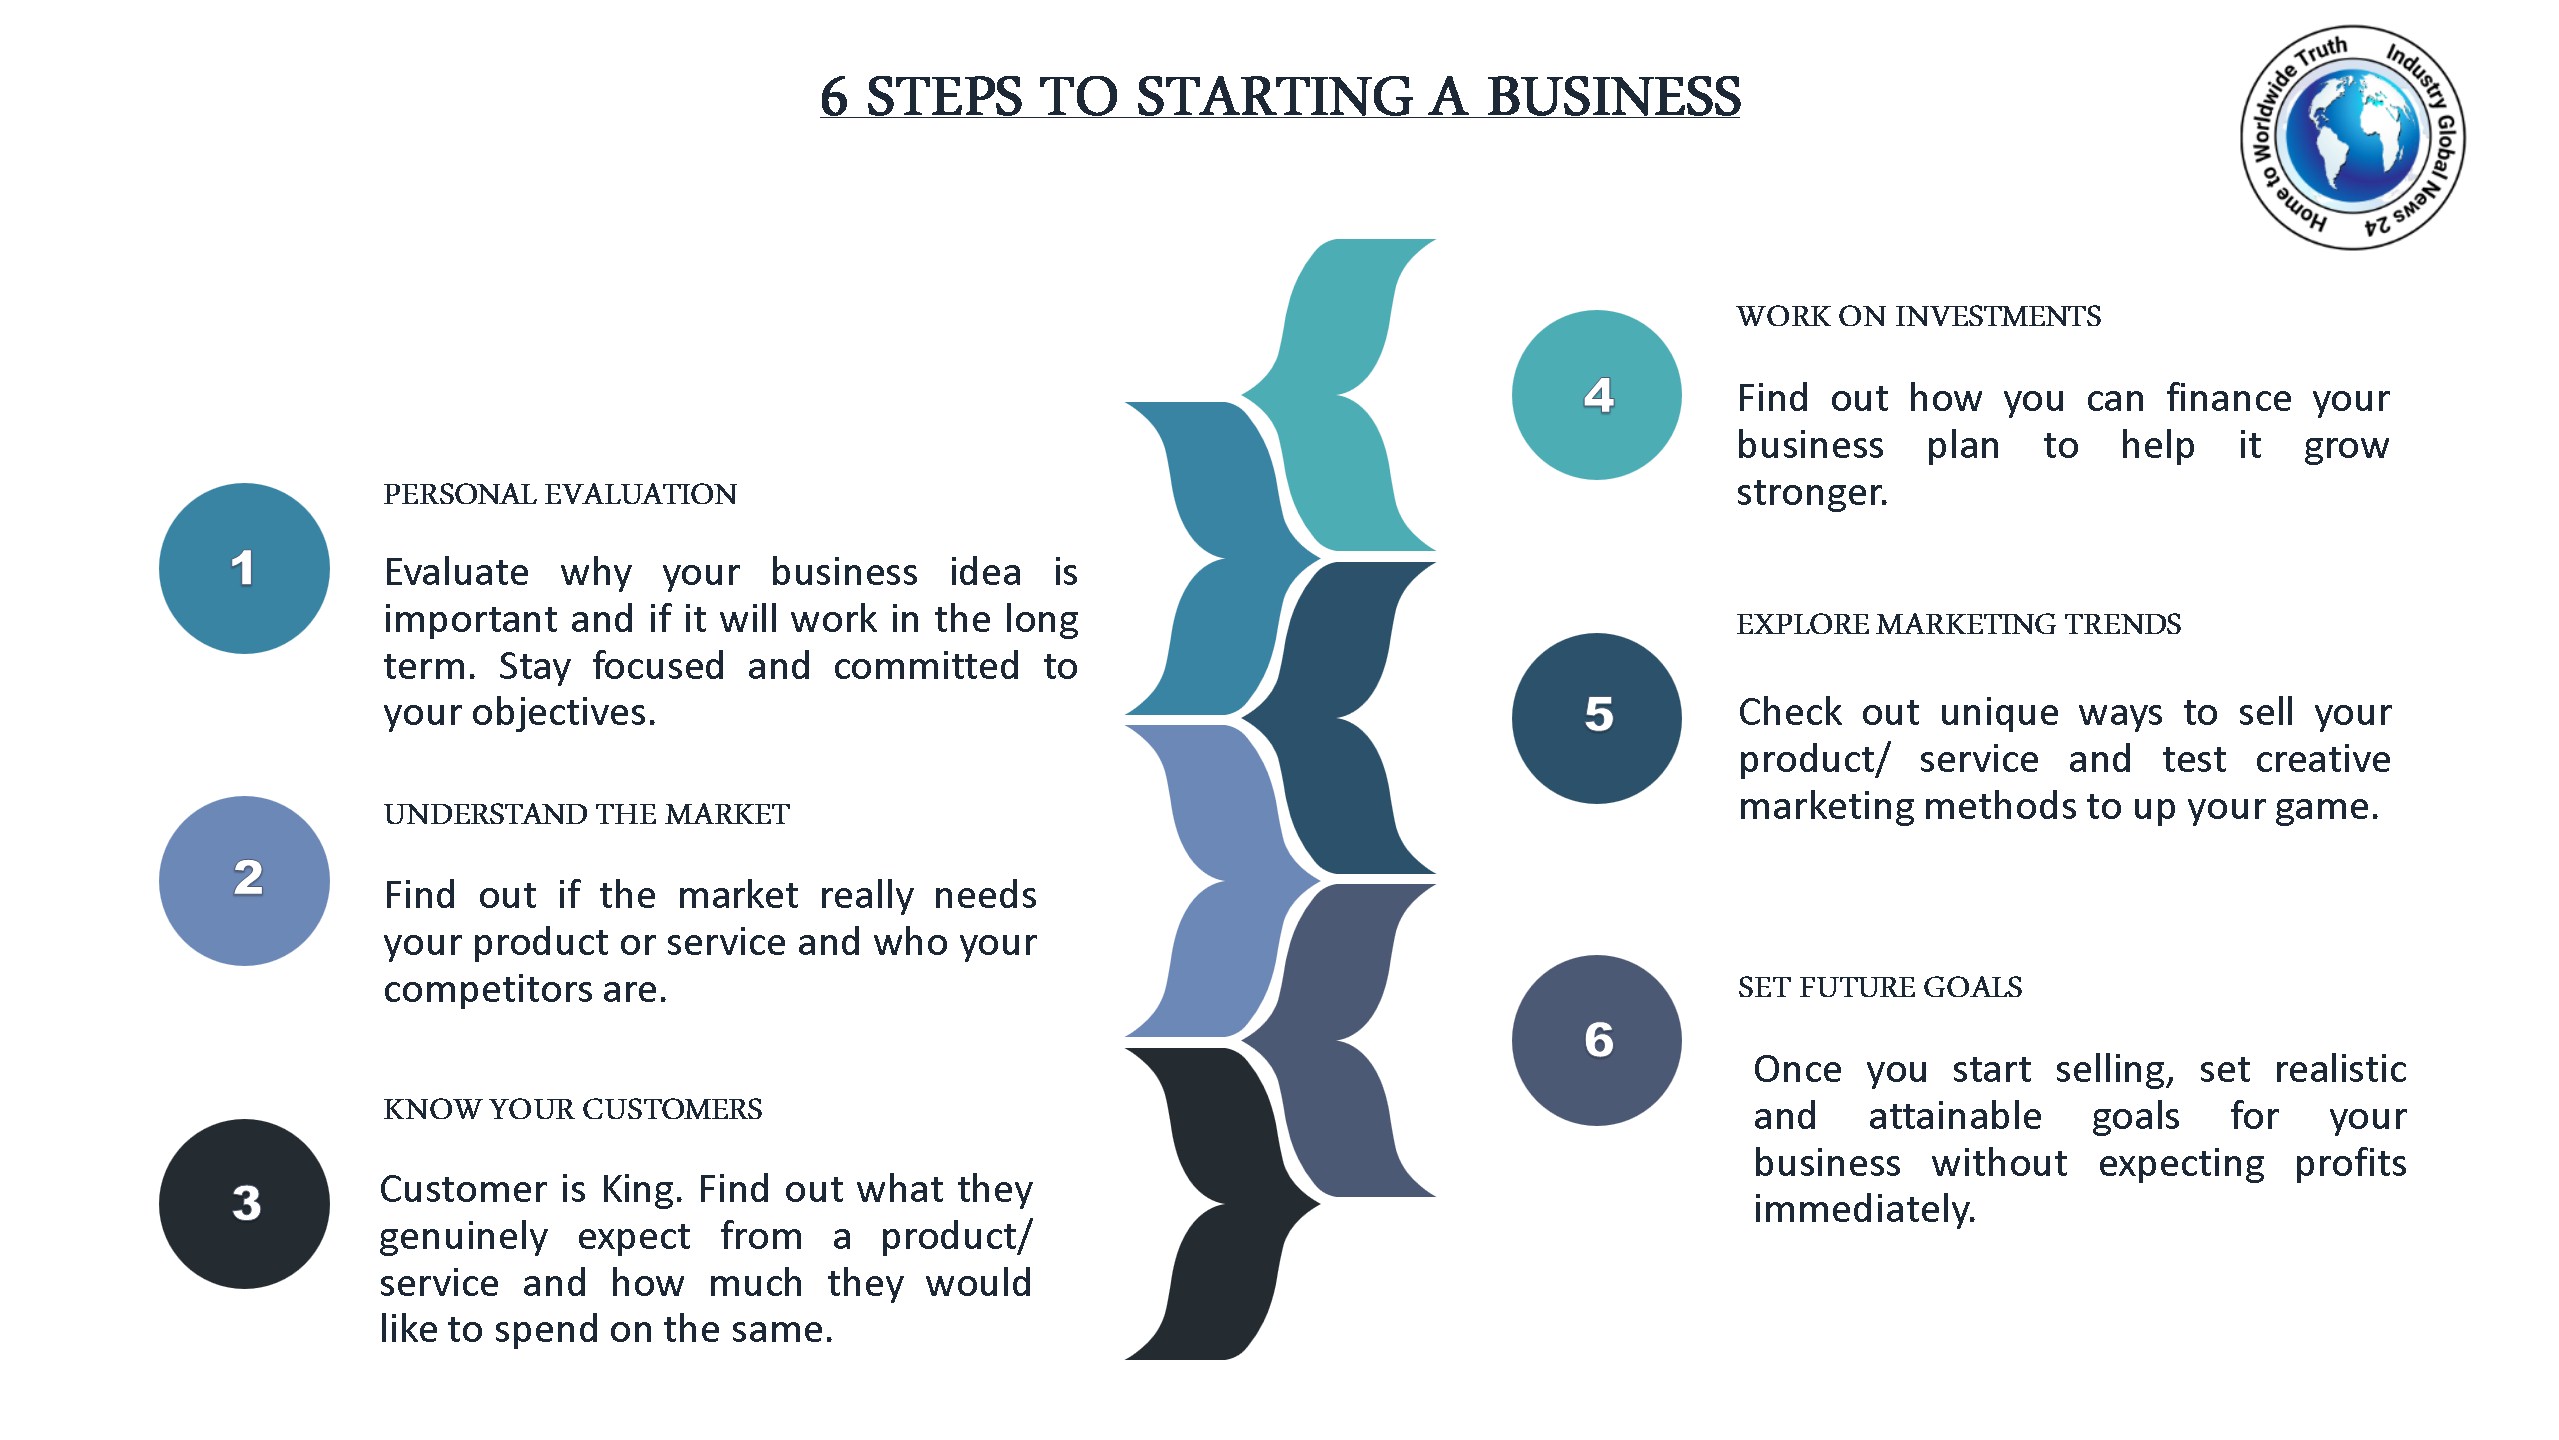 6 STEP TO STARTING A BUSINESS